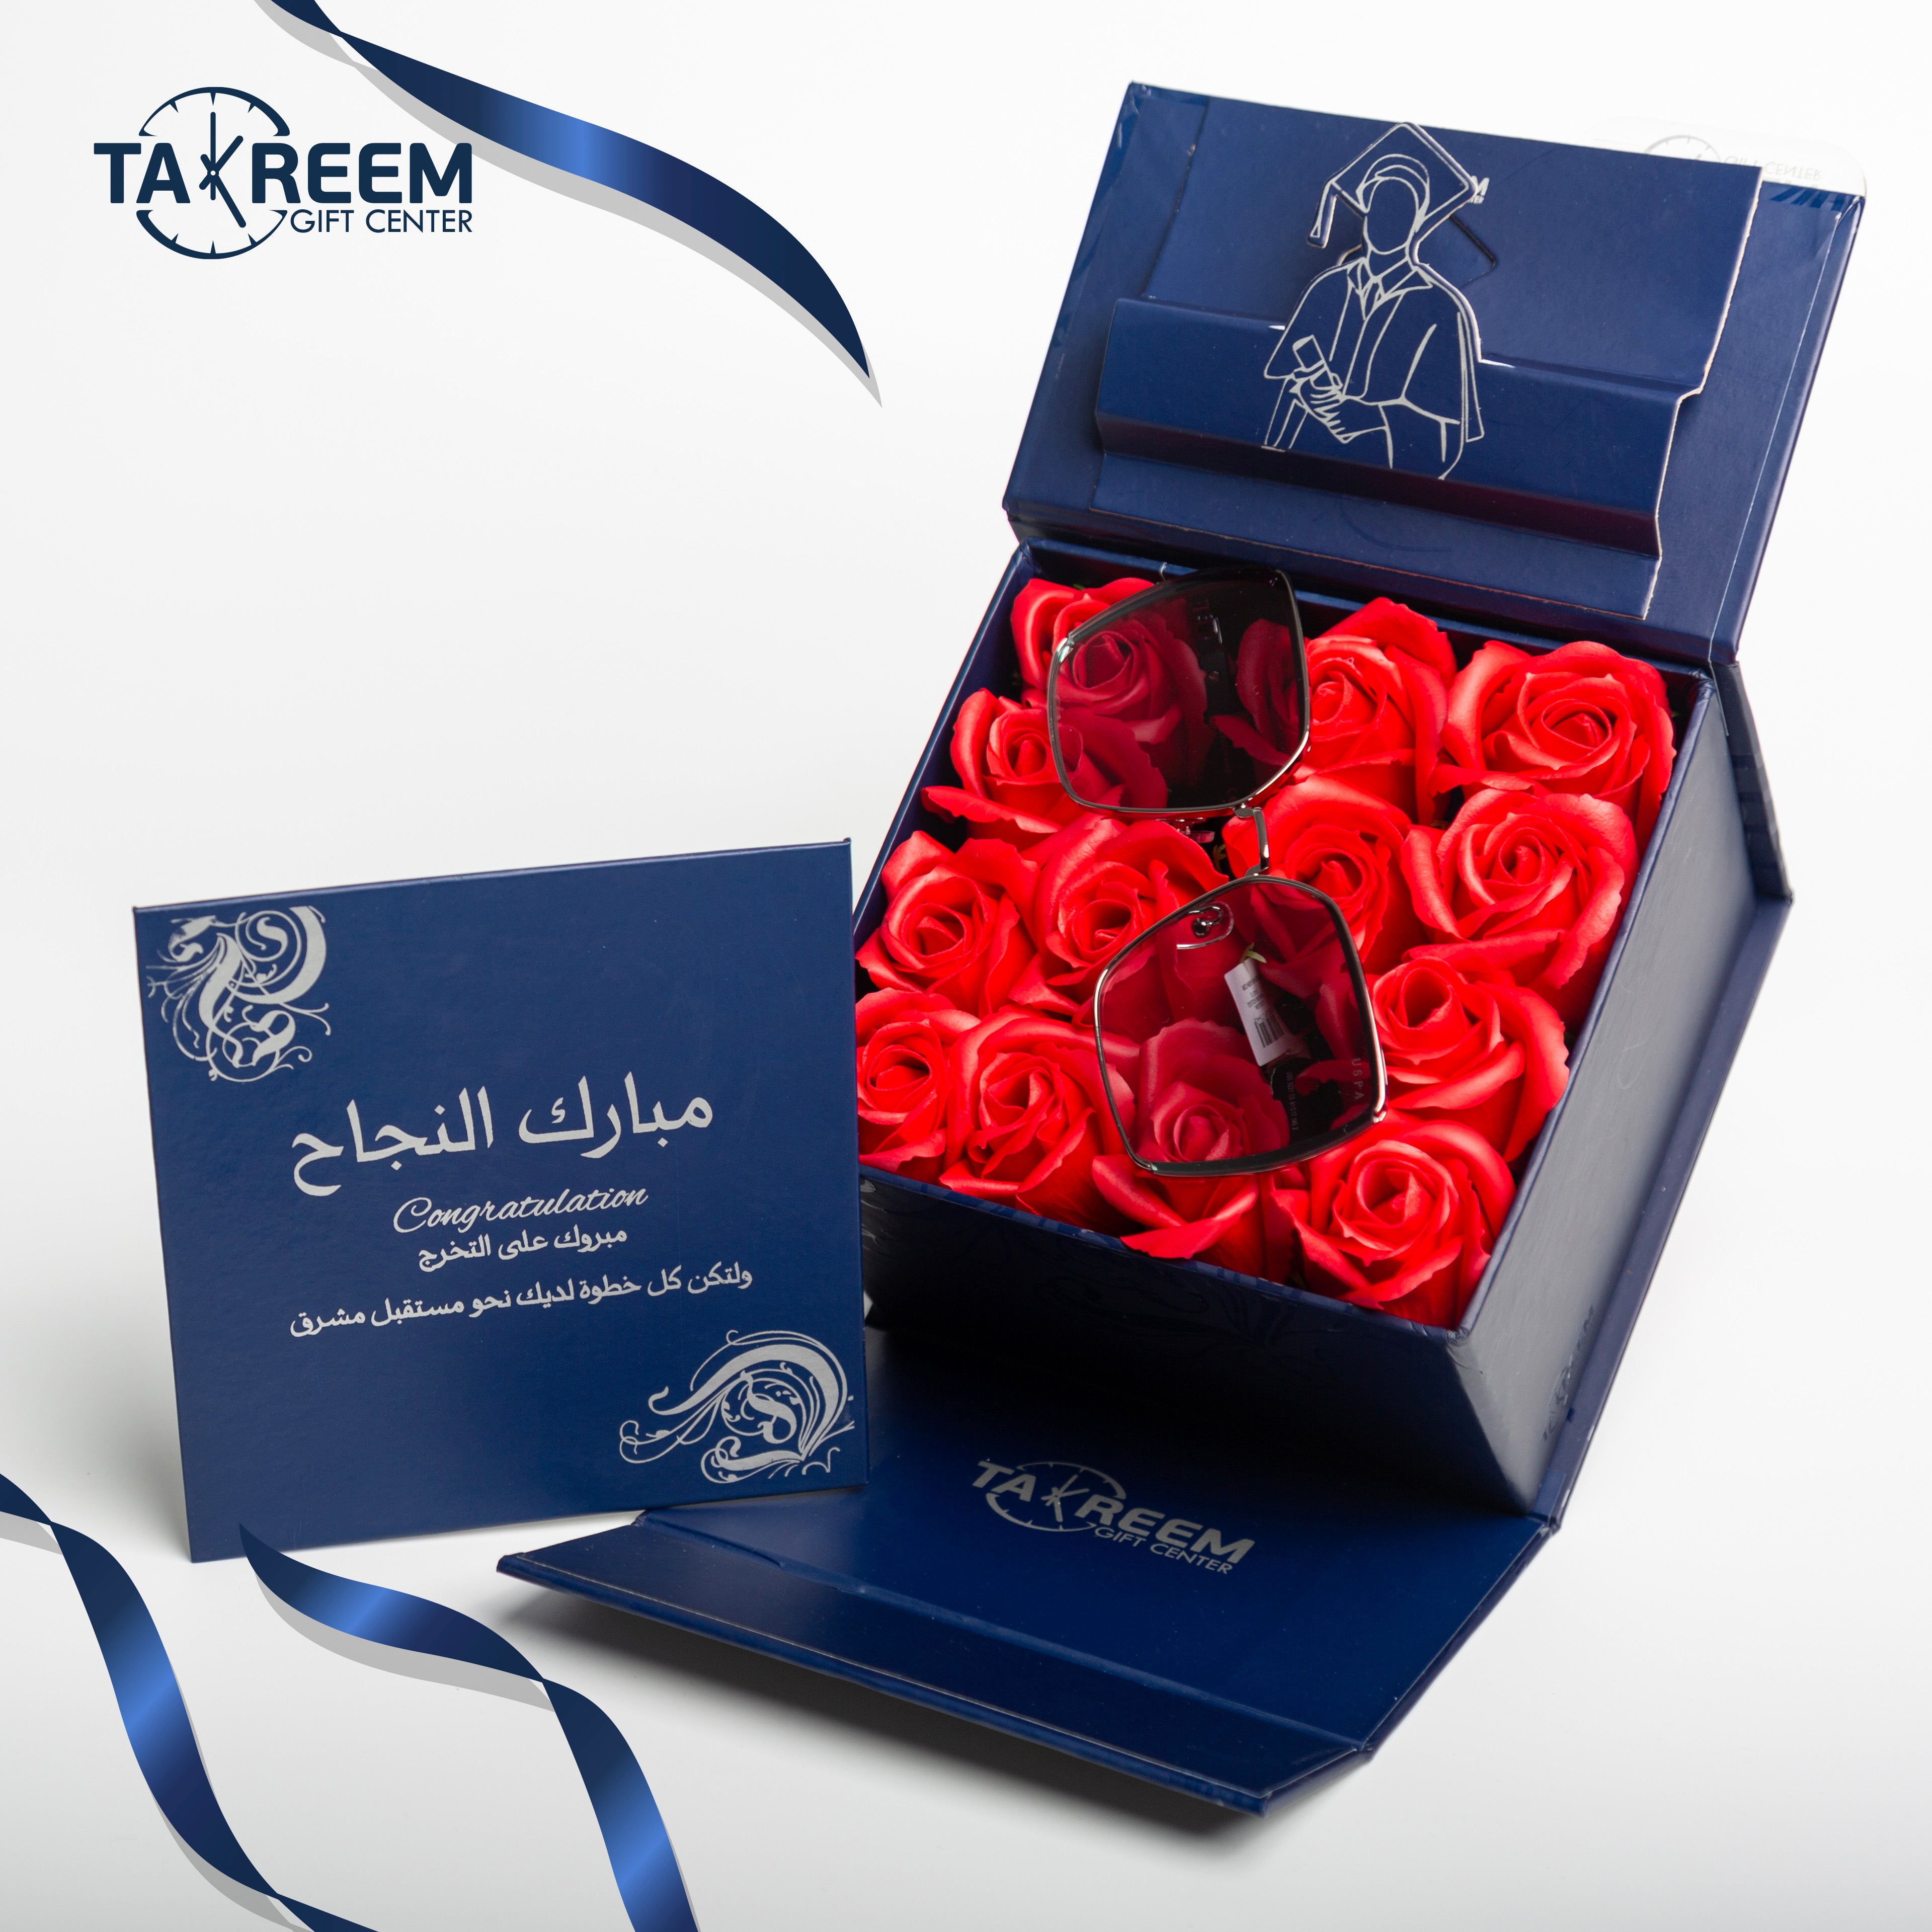 Small Smile6 Gift Boxes By Takreem Gifts Center